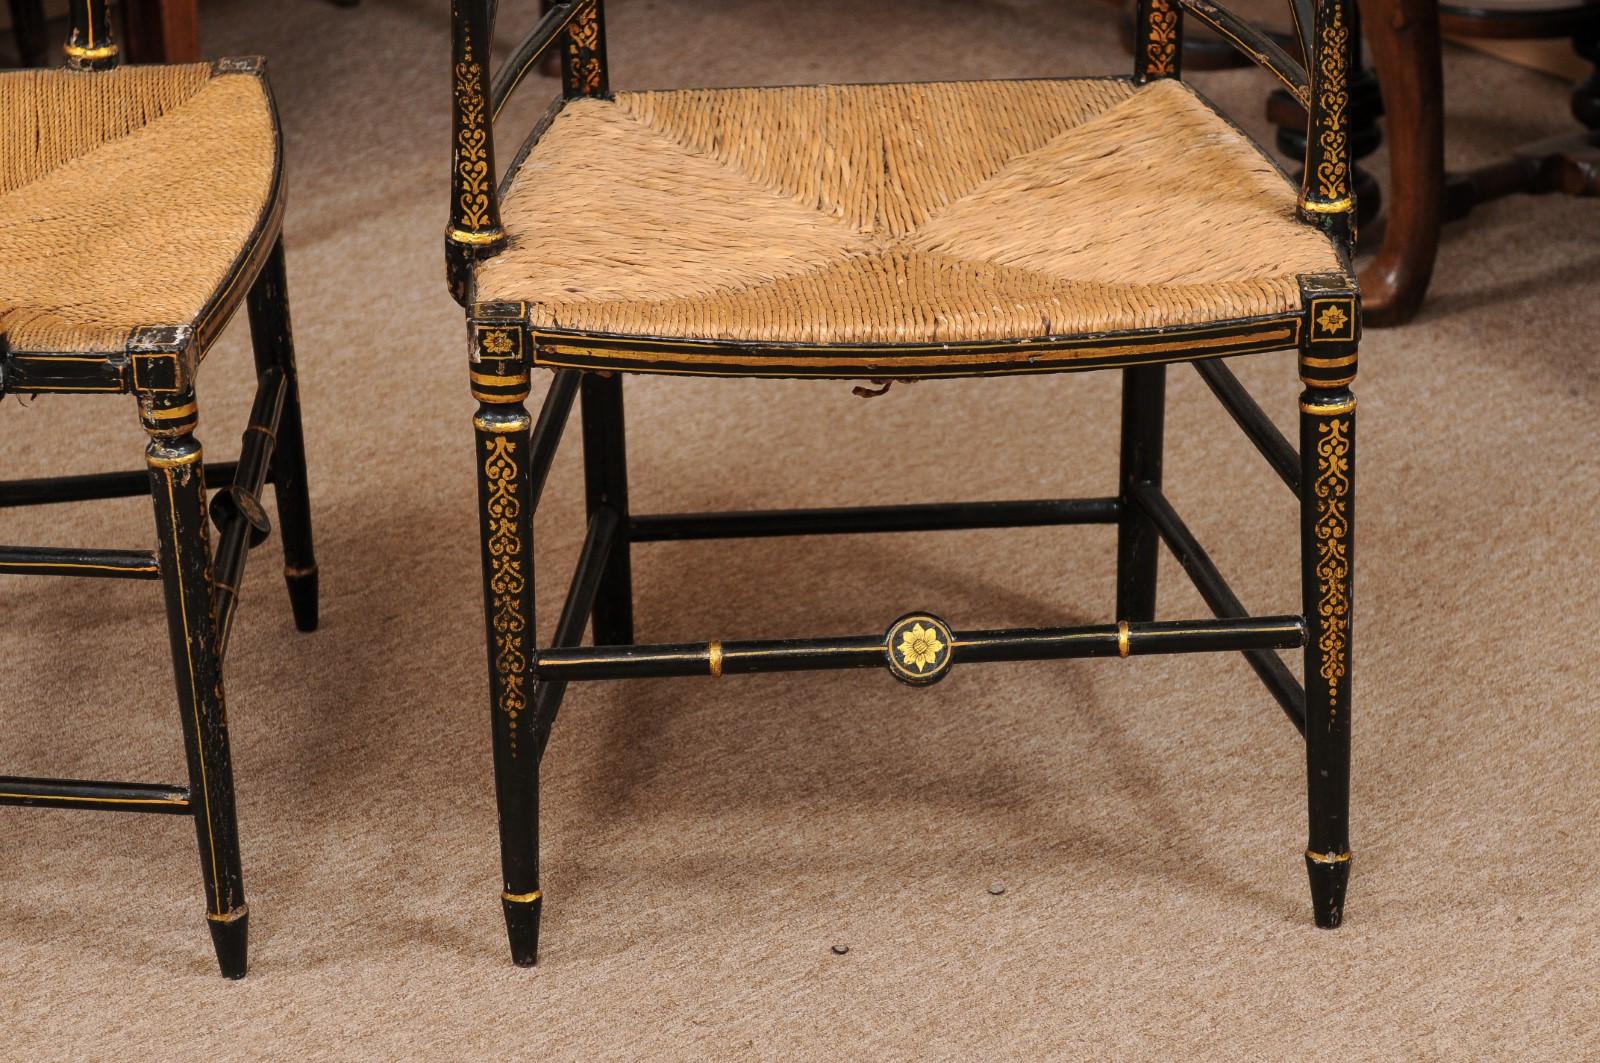 19th Century  Pair of Regency Black Painted Arm Chairs with Floral Decoration & Rush Seats For Sale